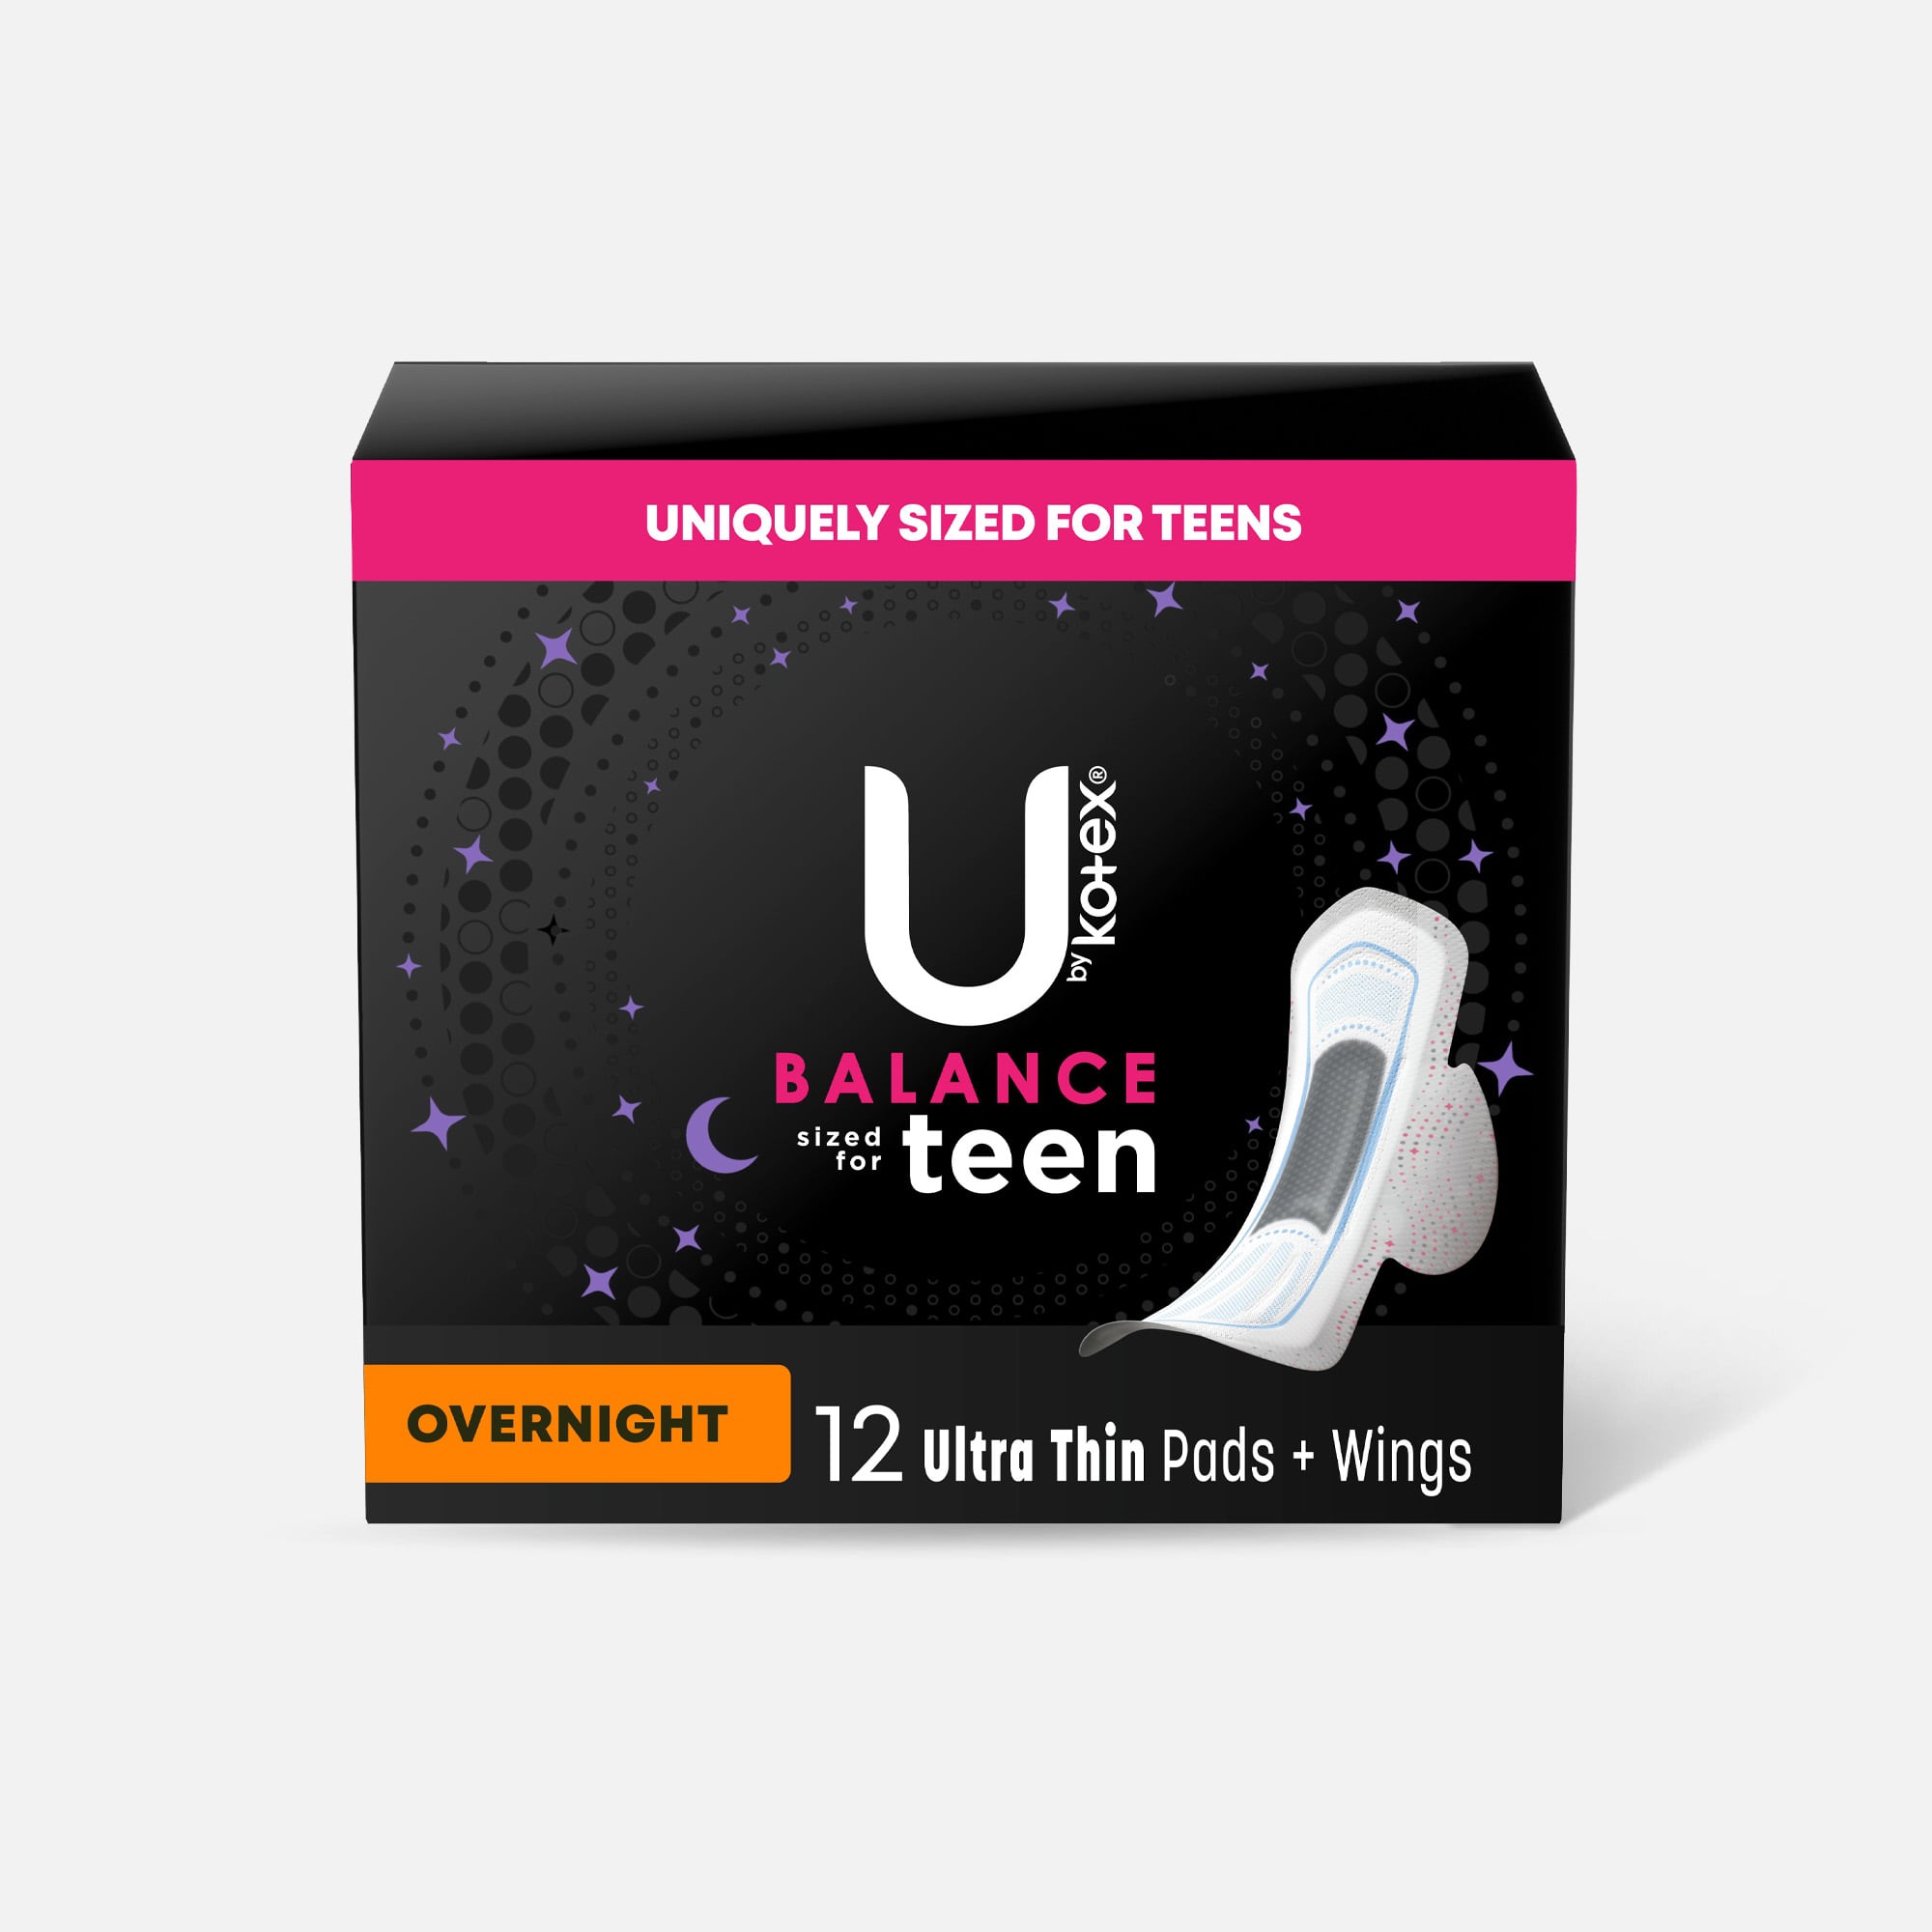 HSA Eligible  U by Kotex Super Premium Ultra Thin Overnight with Wings  Teen Pad, 12ct